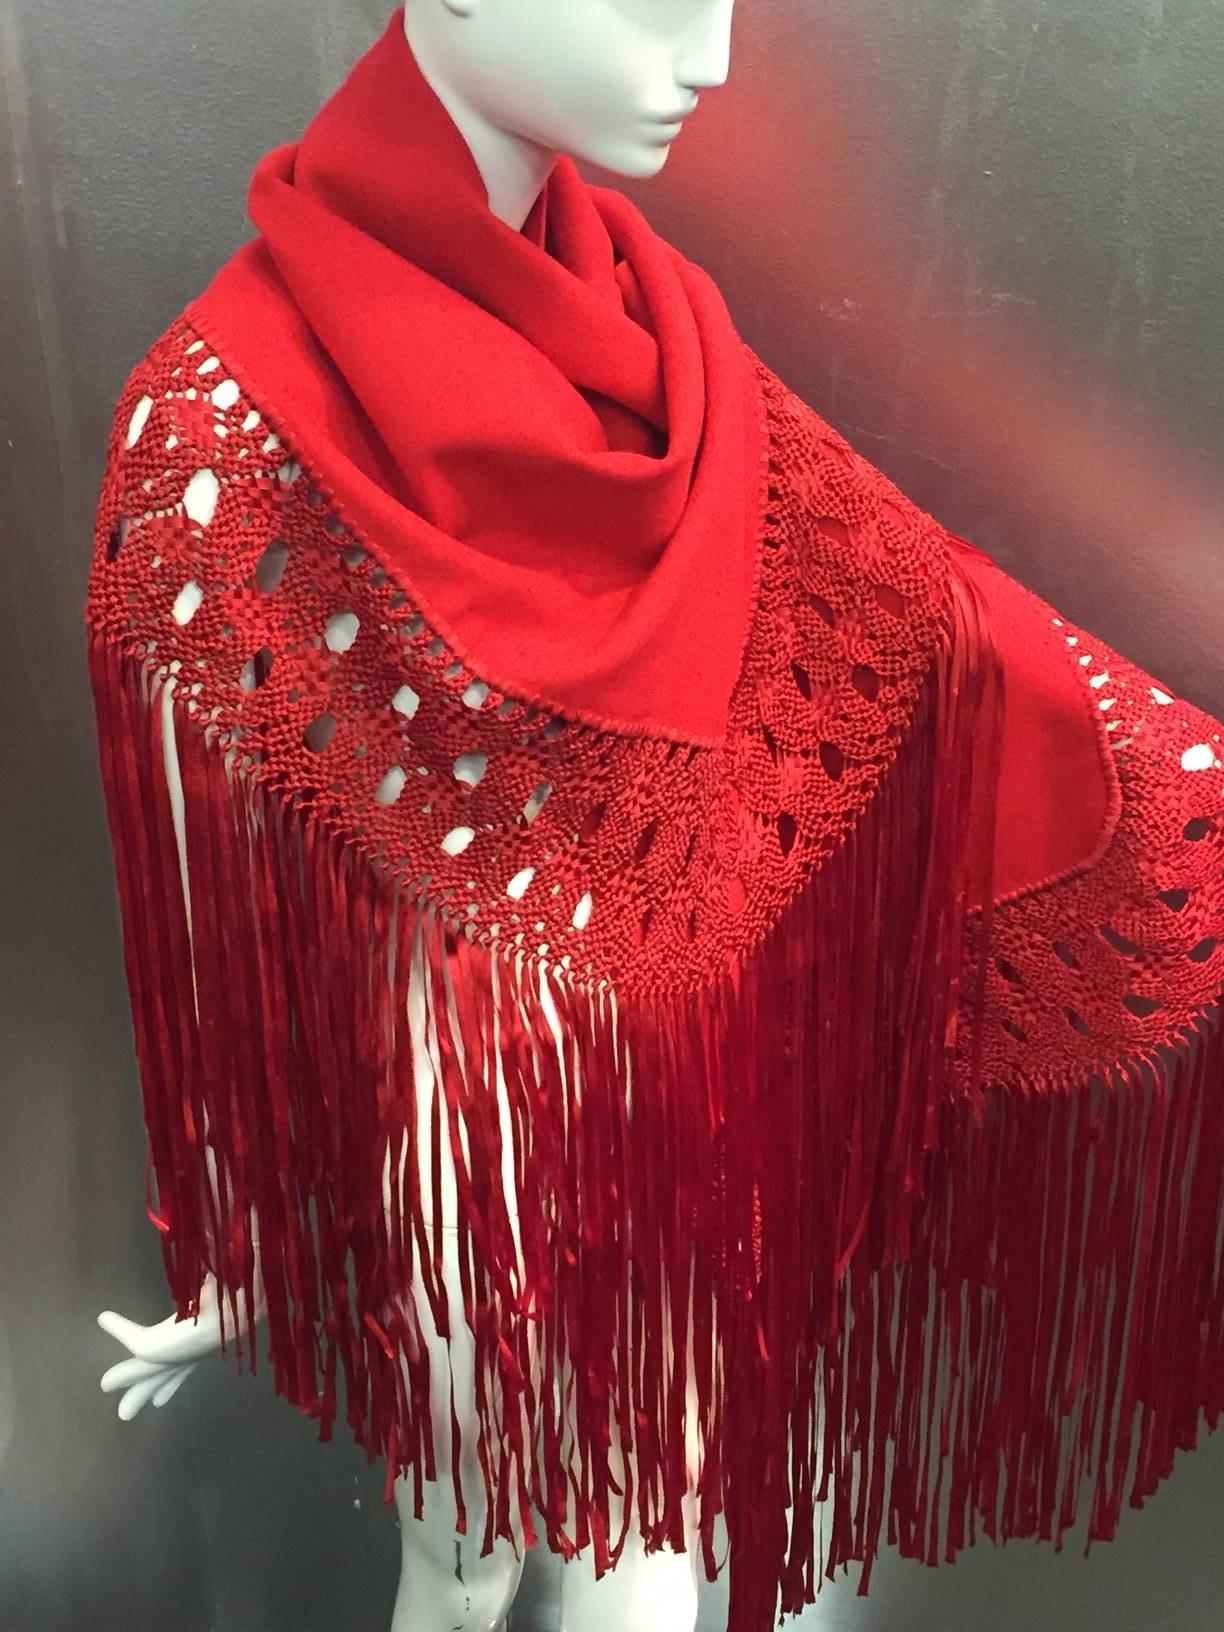 A stunning 1970s cardinal red wool crepe and macrame ribbon fringed shawl.  Trimmed in beautiful macrame fringe on three sides. 

Wool crepe part measures 56